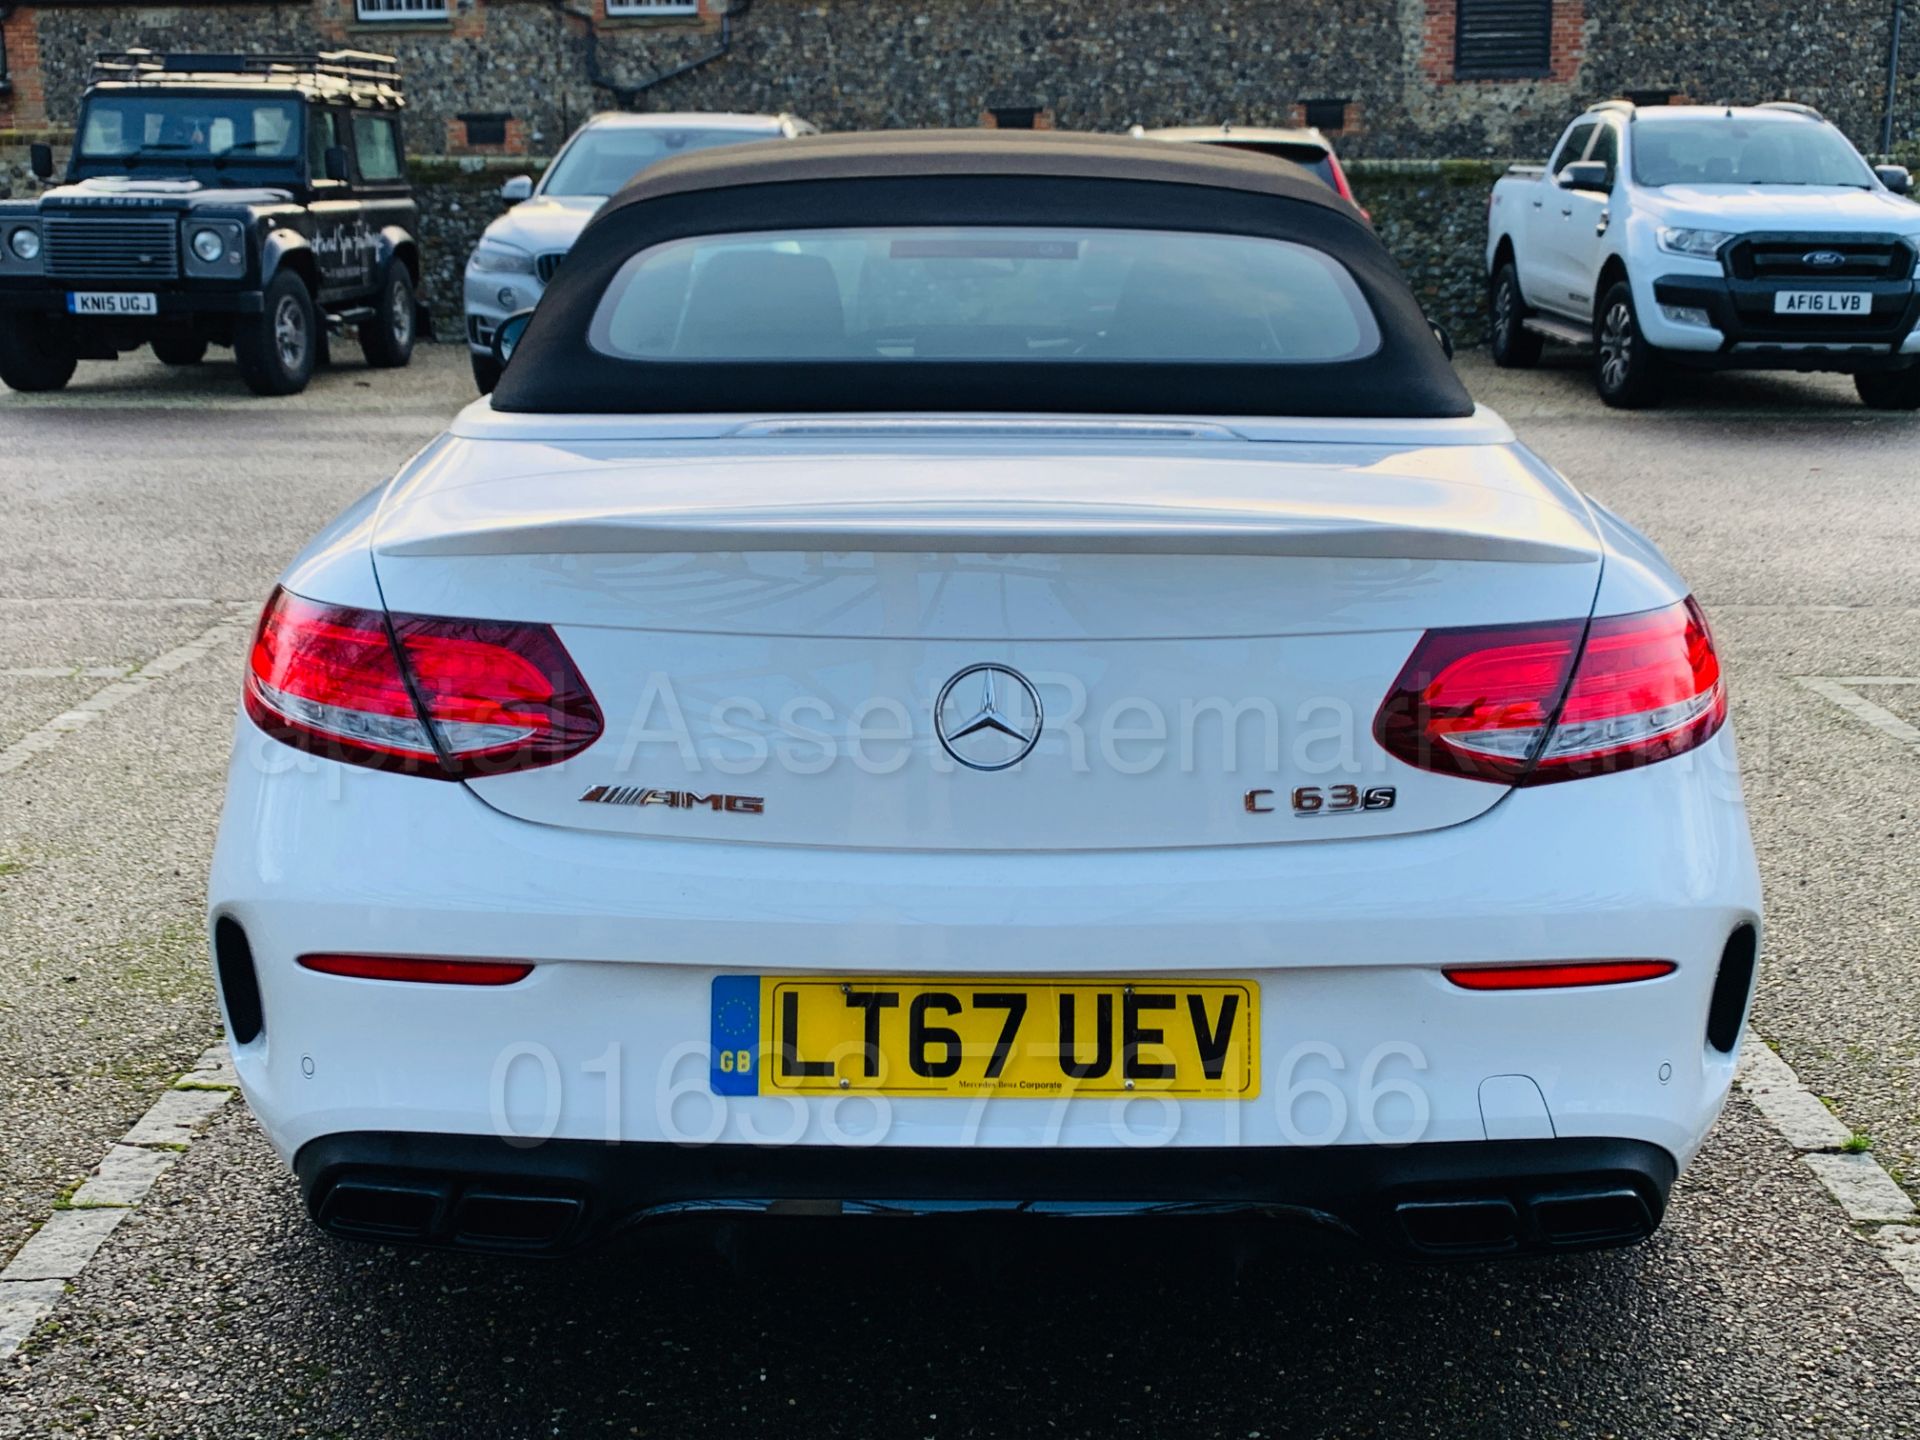 (On Sale) MERCEDES-BENZ AMG C63-S *CABRIOLET* (67 REG) '4.0 BI-TURBO -510 BHP - AUTO' *FULLY LOADED* - Image 20 of 79